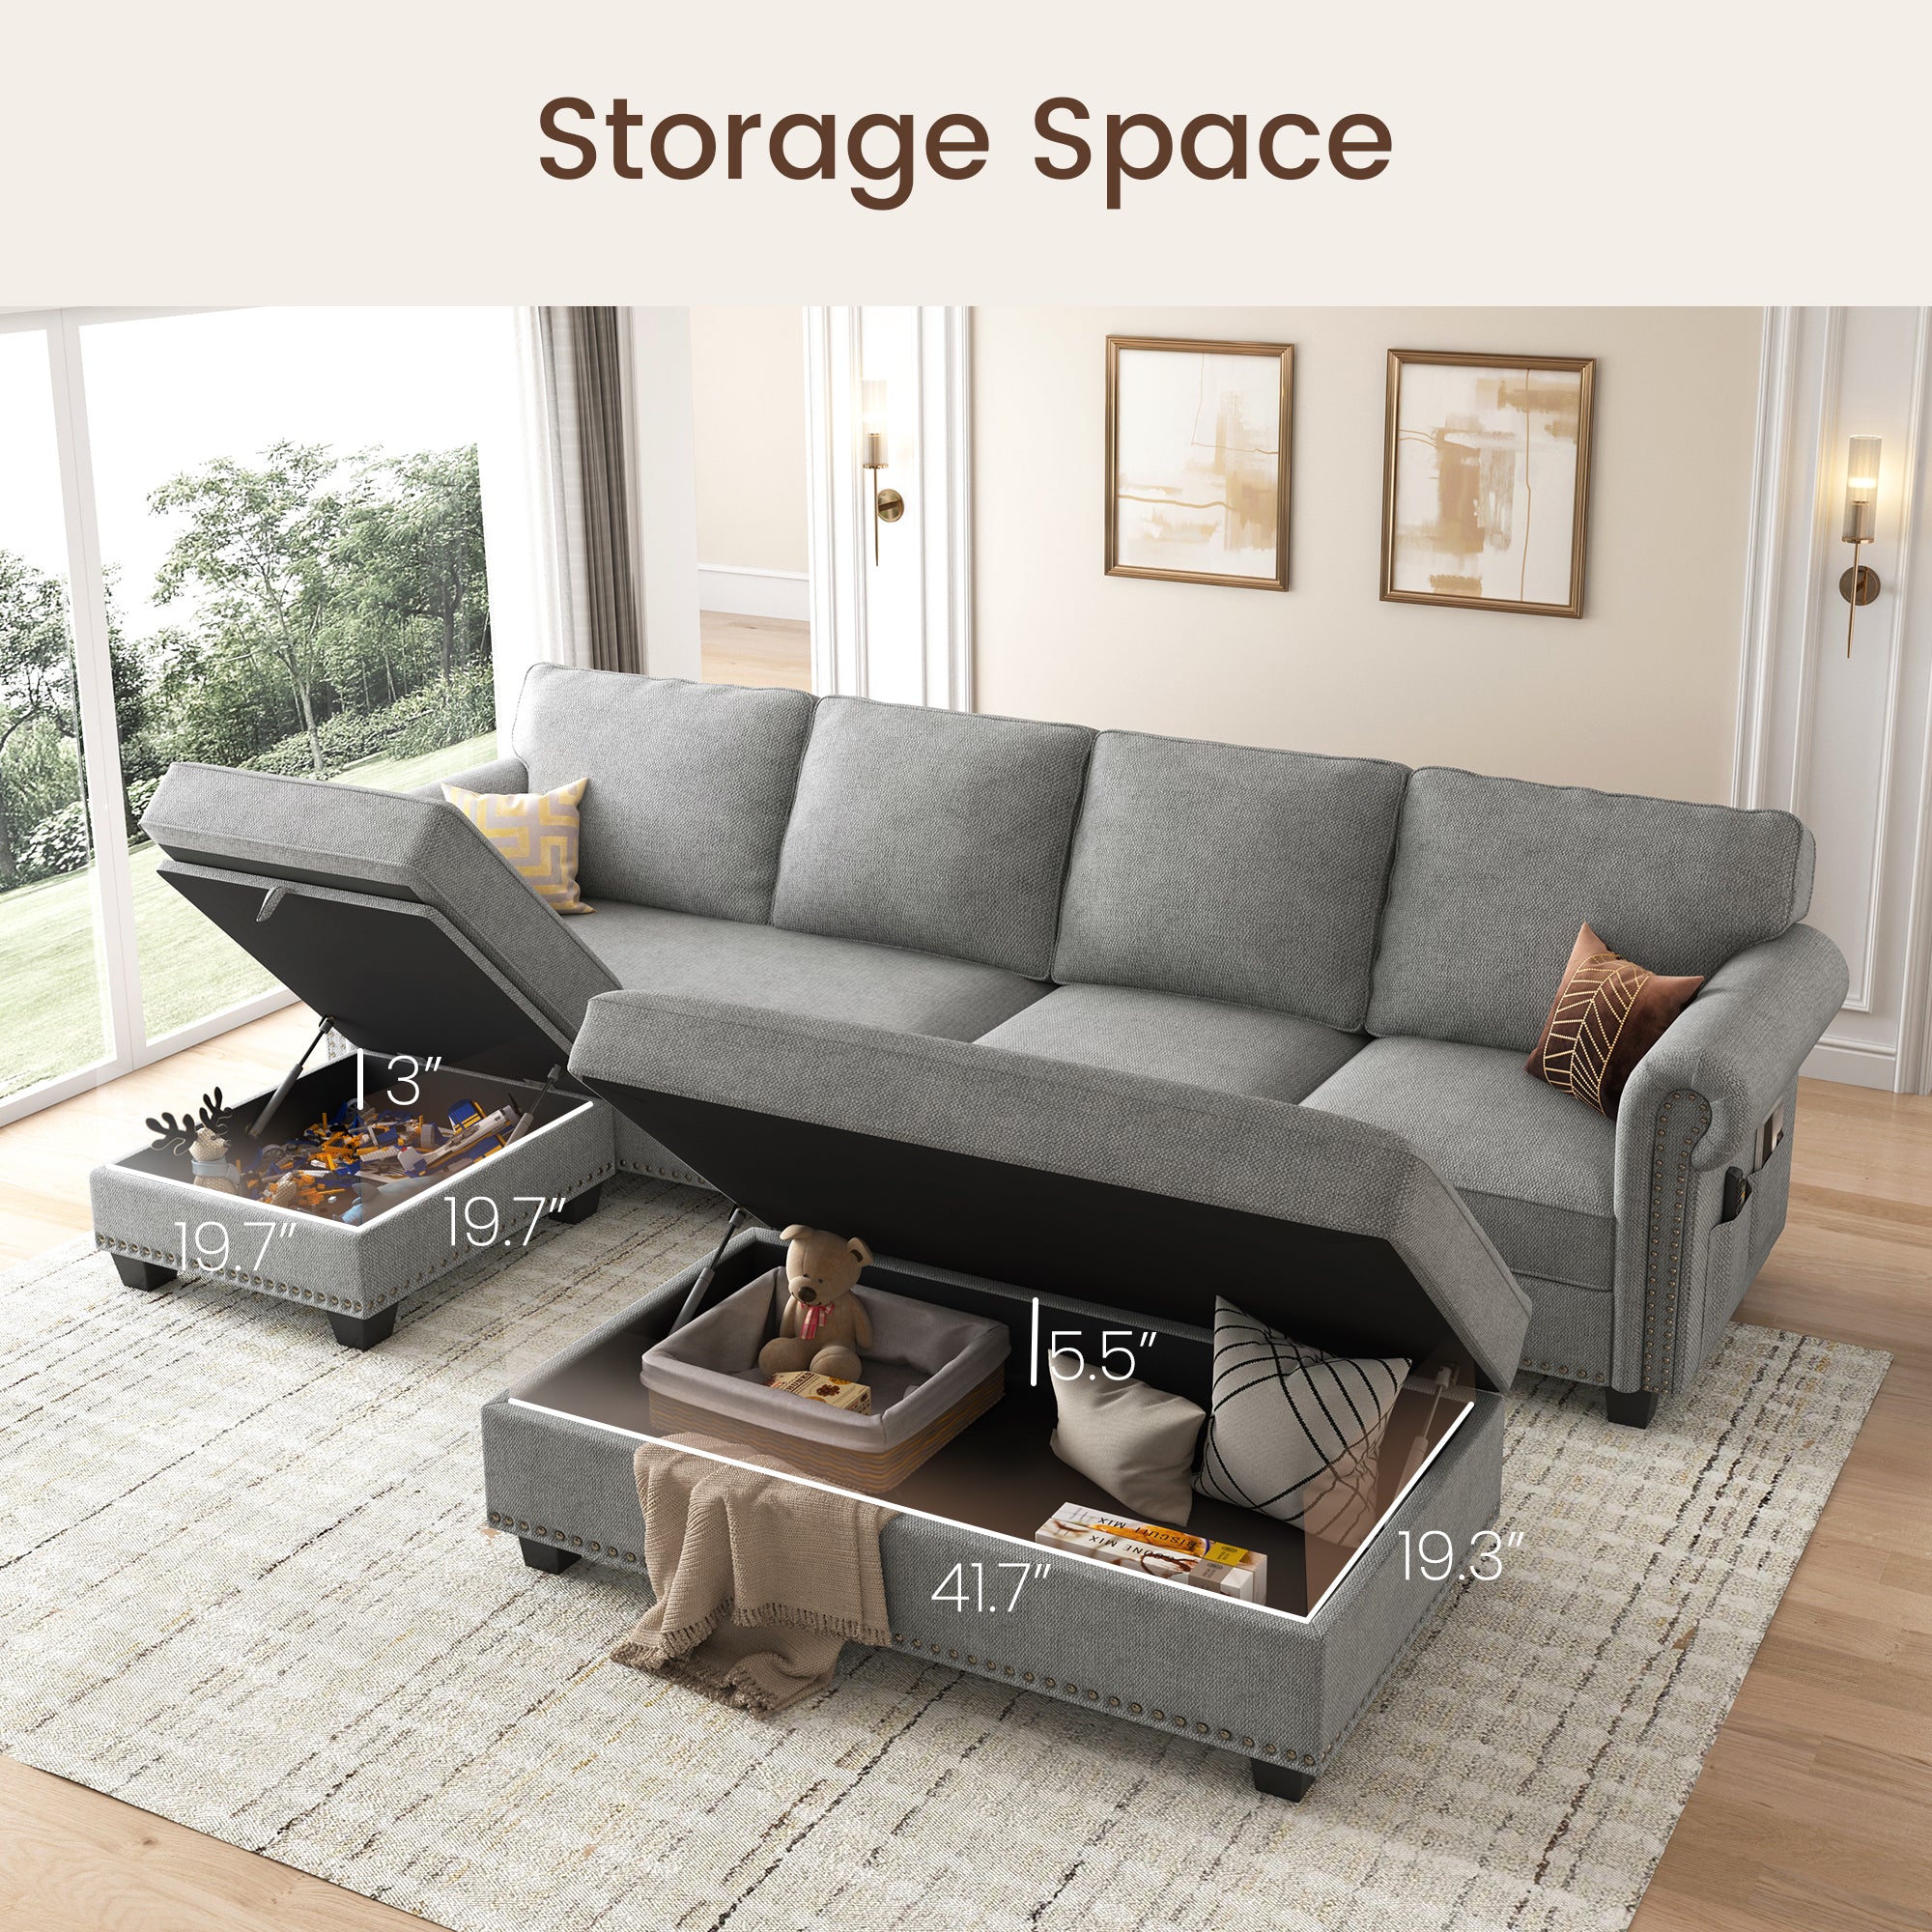 NOLANY Convertible Sectional Sofa 4-Seat with Reversible Chaise L Shaped Couch with Storage Ottoman for Living Room Furniture